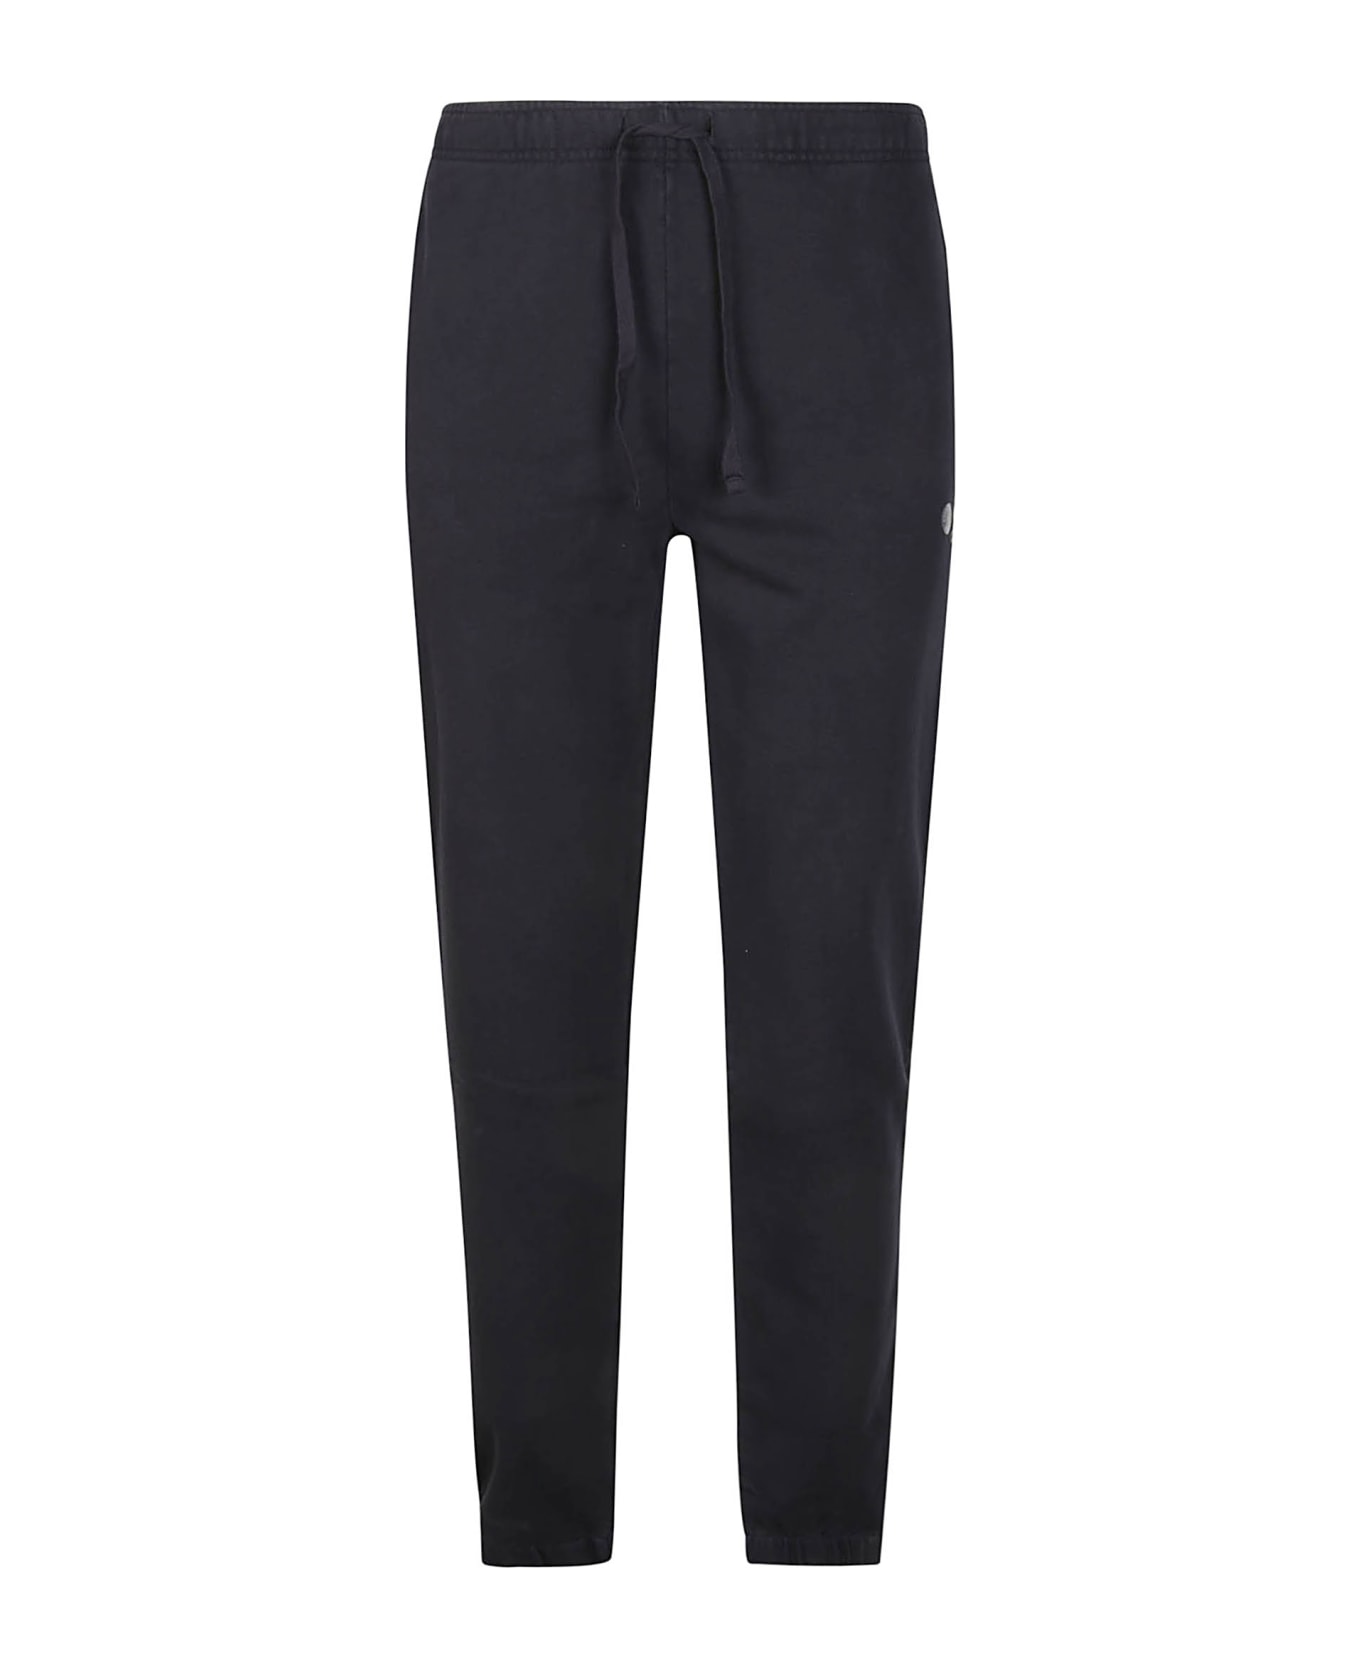 Polo Ralph Lauren Terry Athletic Pant - Faded Black